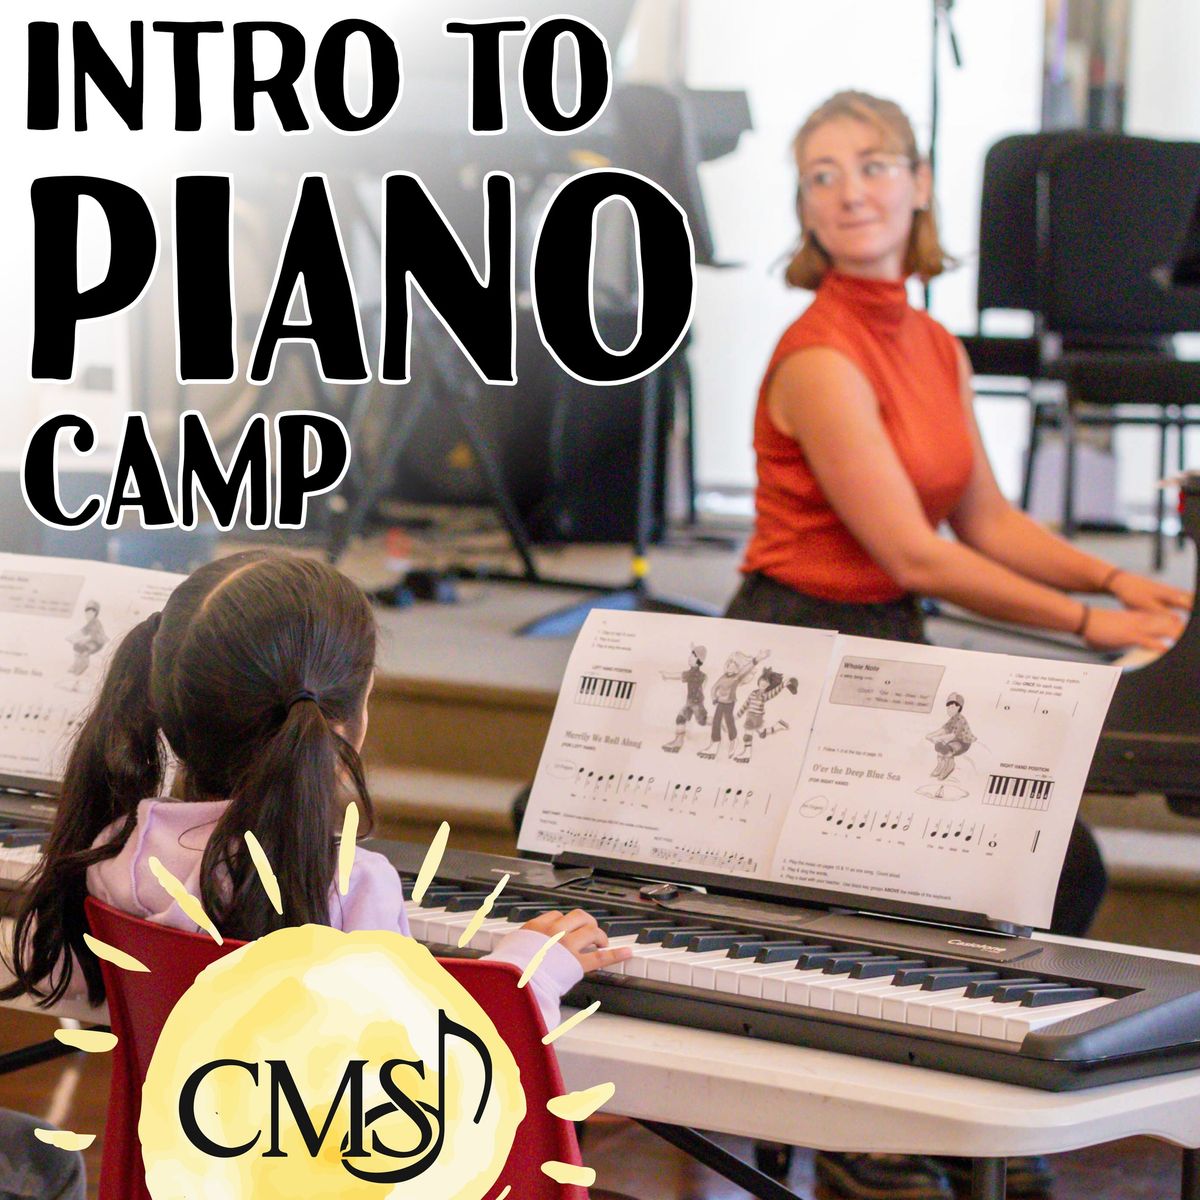 Intro to Piano Camp